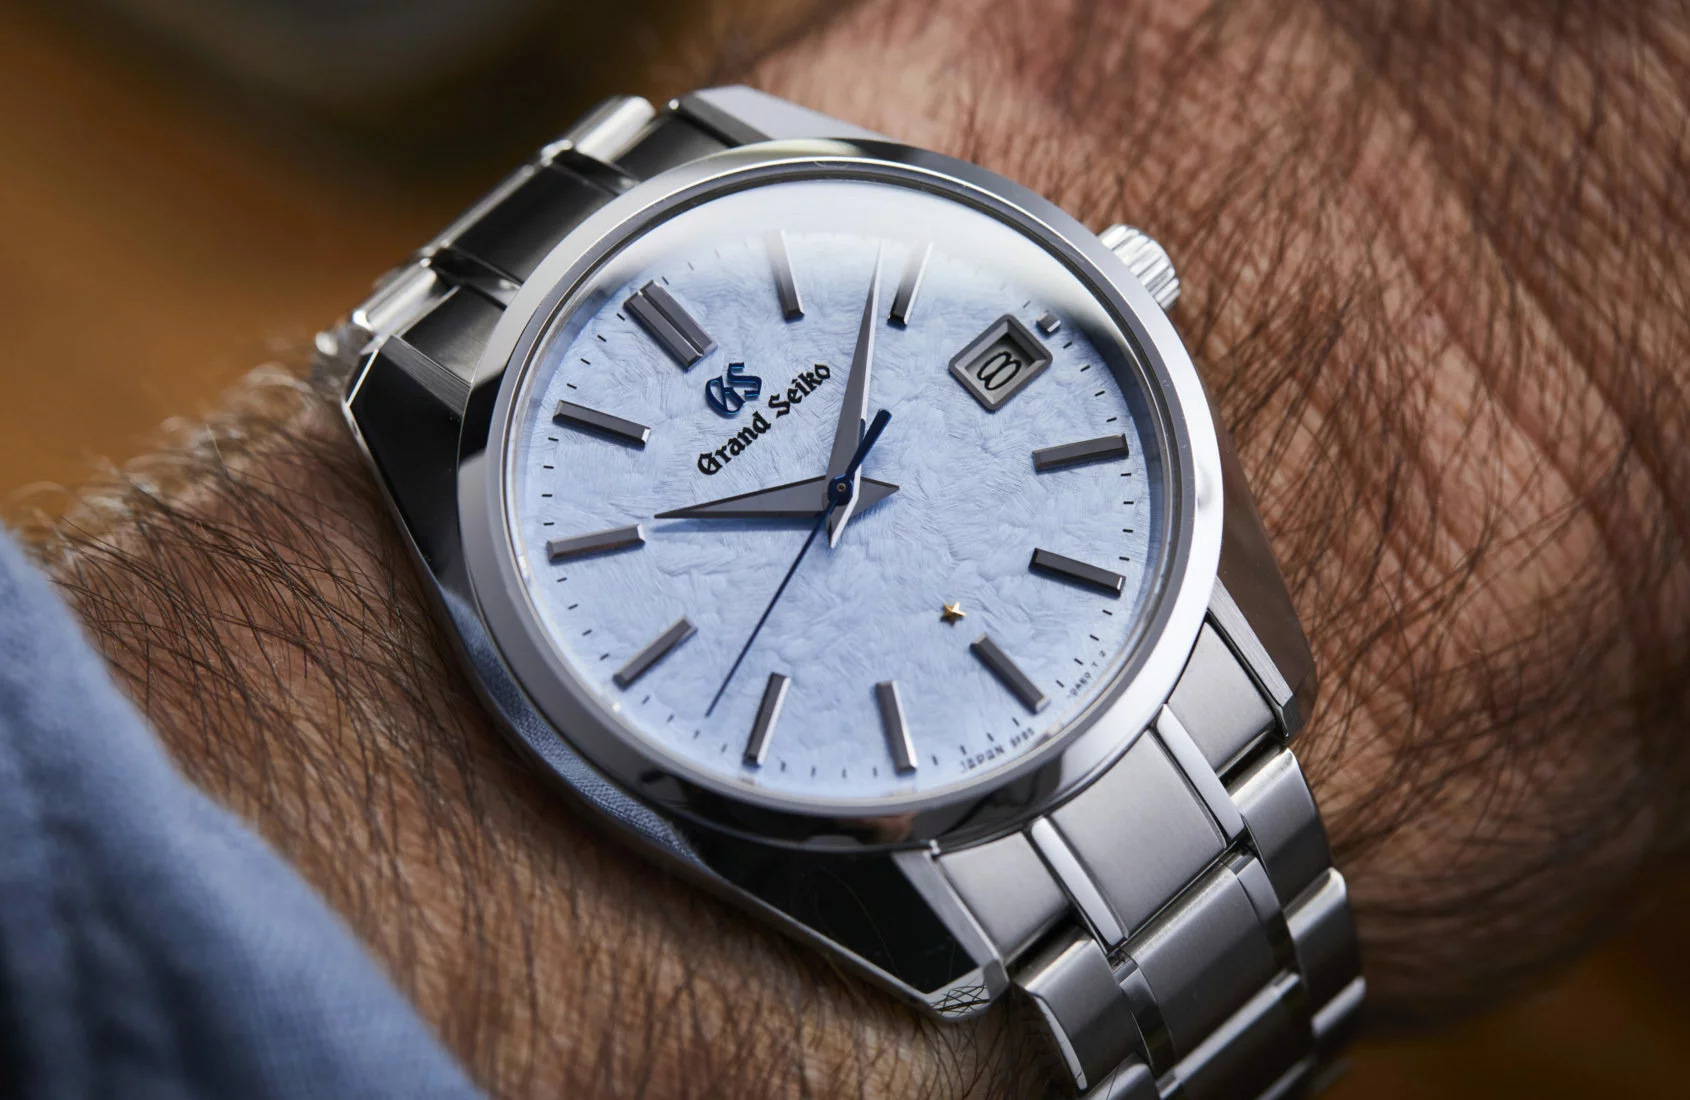 The Grand Seiko SBGP017 raises a refined middle finger to movement snobs